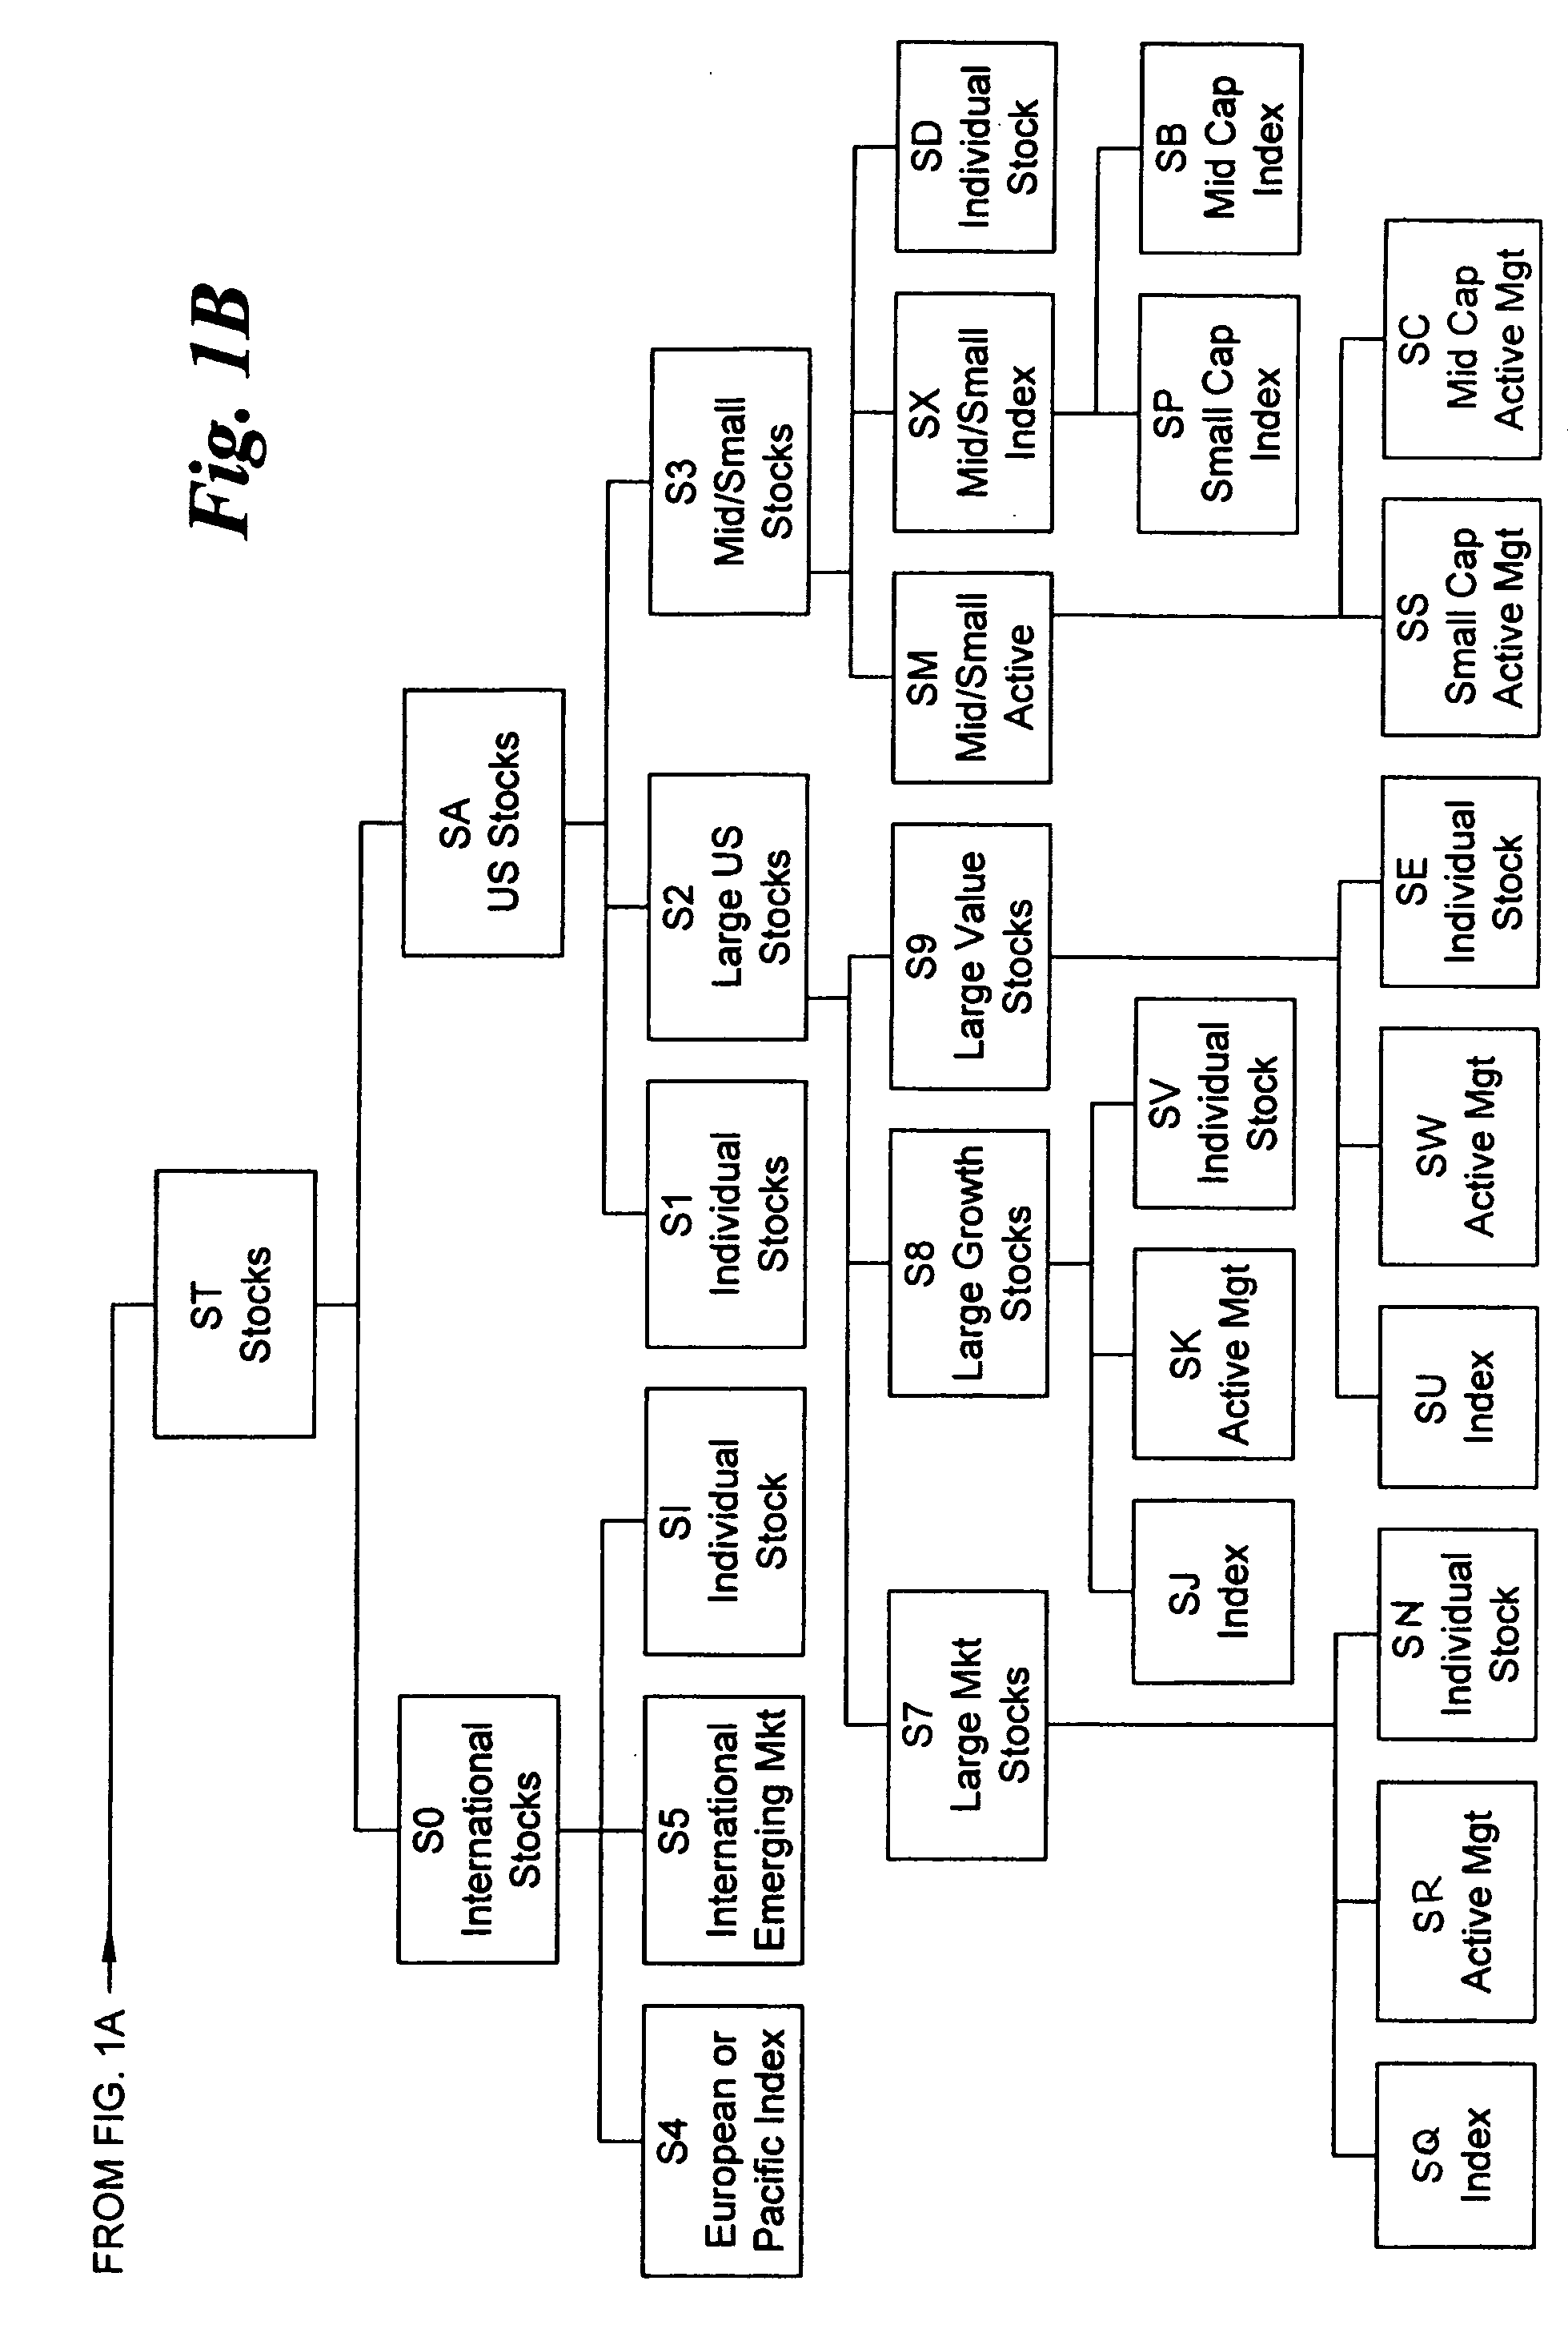 System and method for automating investment planning